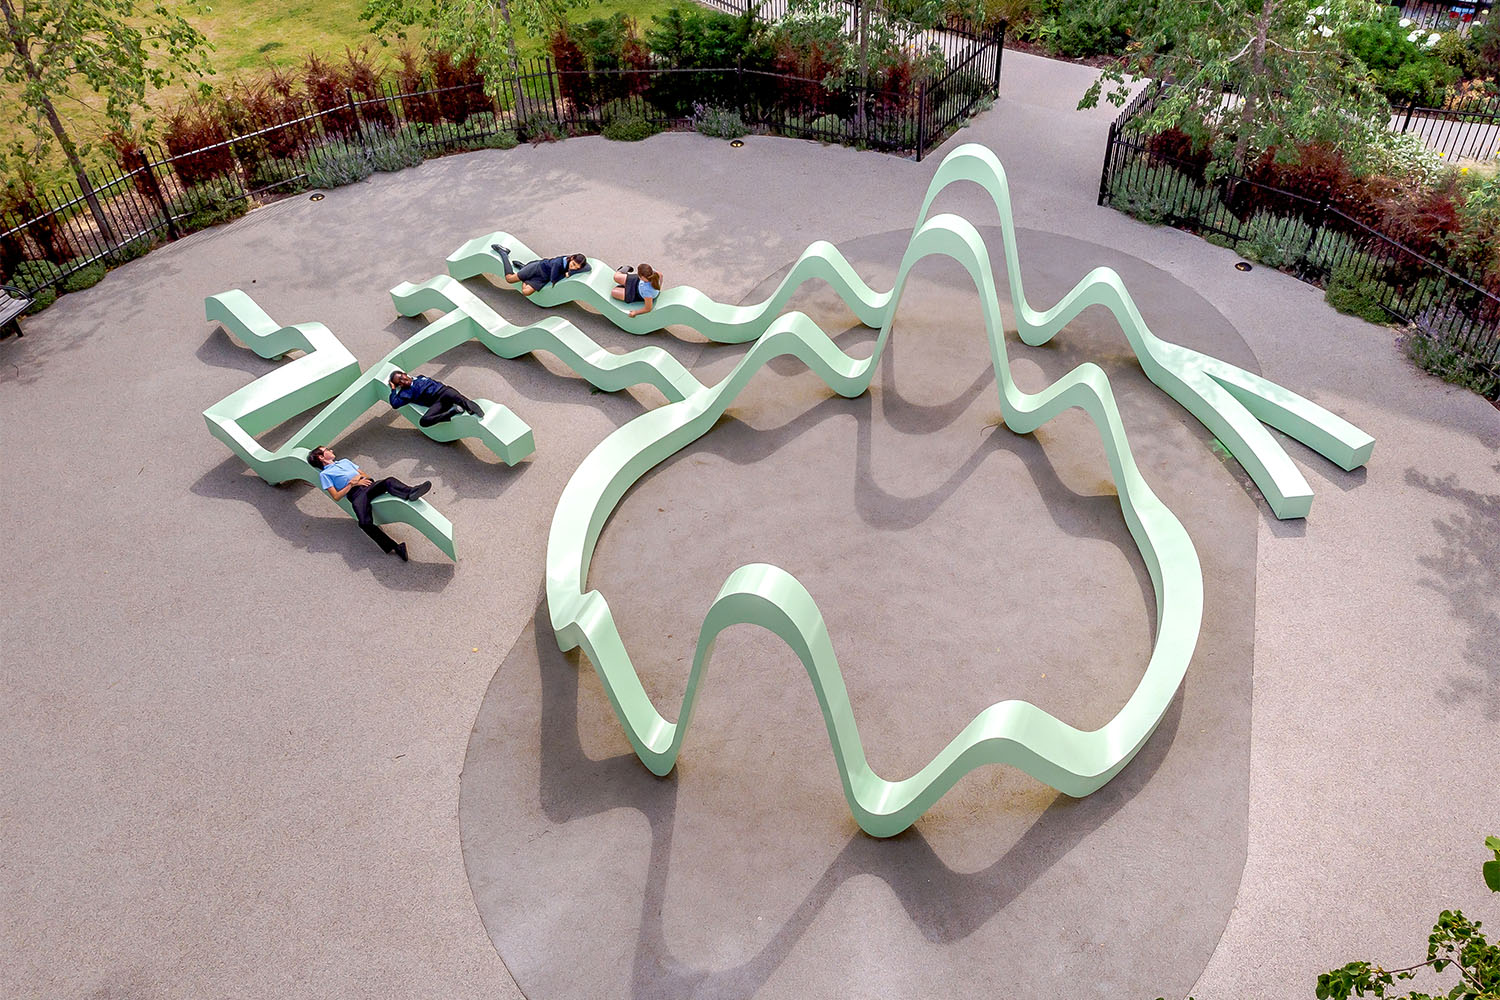 “Born to be Wild” installation resembles an archaeological bearpit from above